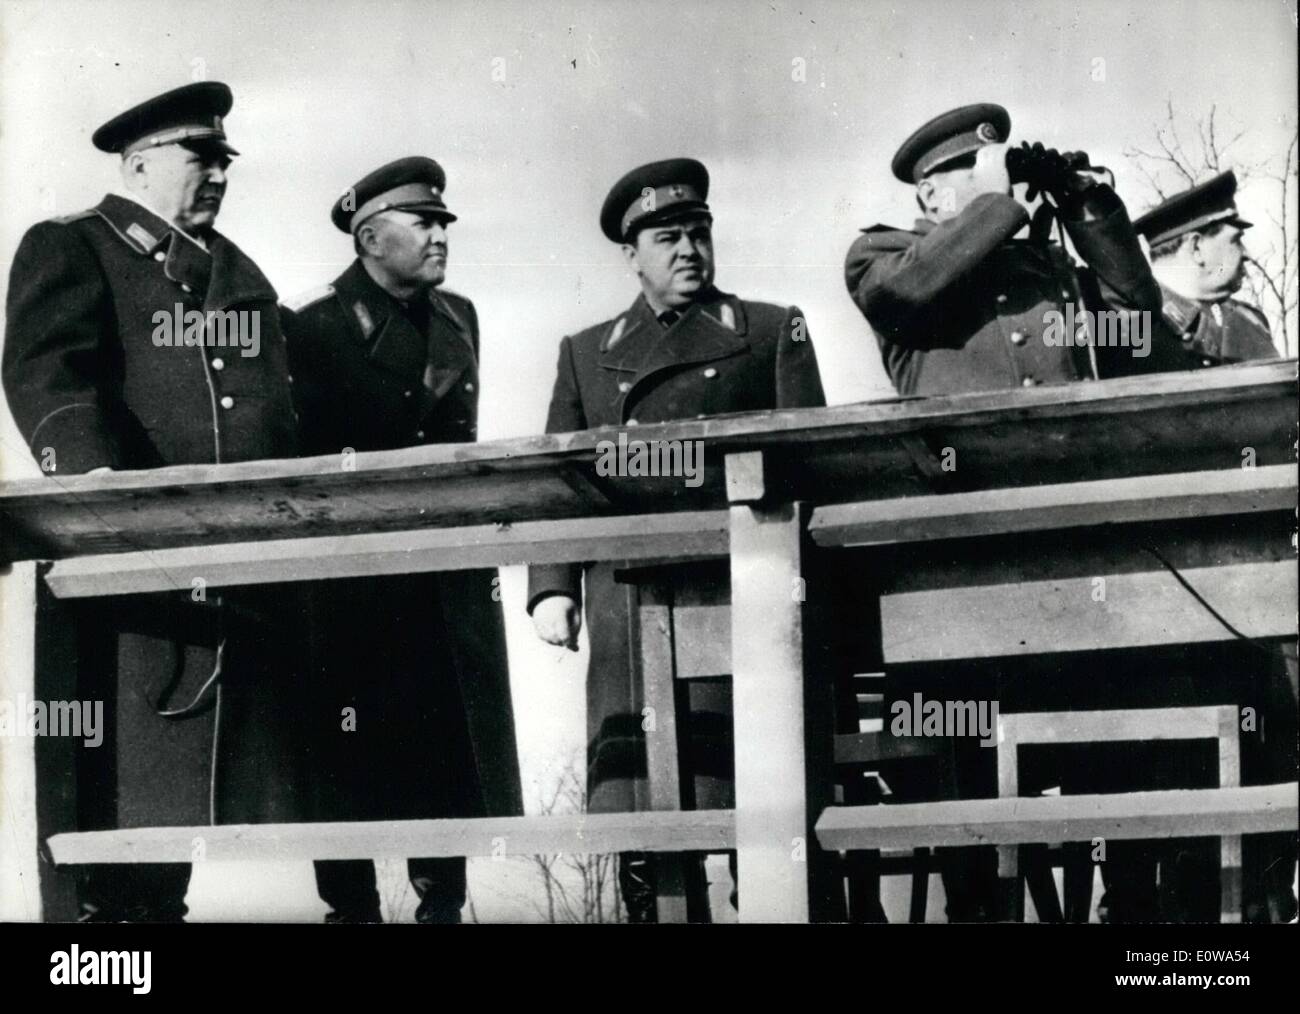 Apr. 04, 1962 - Manoeuvre in Hungary In Hungary, manoeuvres are now held by the Warsaw Treaty states. Our picture shows (left to right): Soviet Minister of Defence Marshall Malinowski, Hungarian Deputy Minister of Defence Lt. Gen. Gyula Uszta, Hungarian Minister of Defence Col. Gen. Lajos Czinege ad the Romanian Minister of Defence Army Gen. Leontin Salajan. Stock Photo